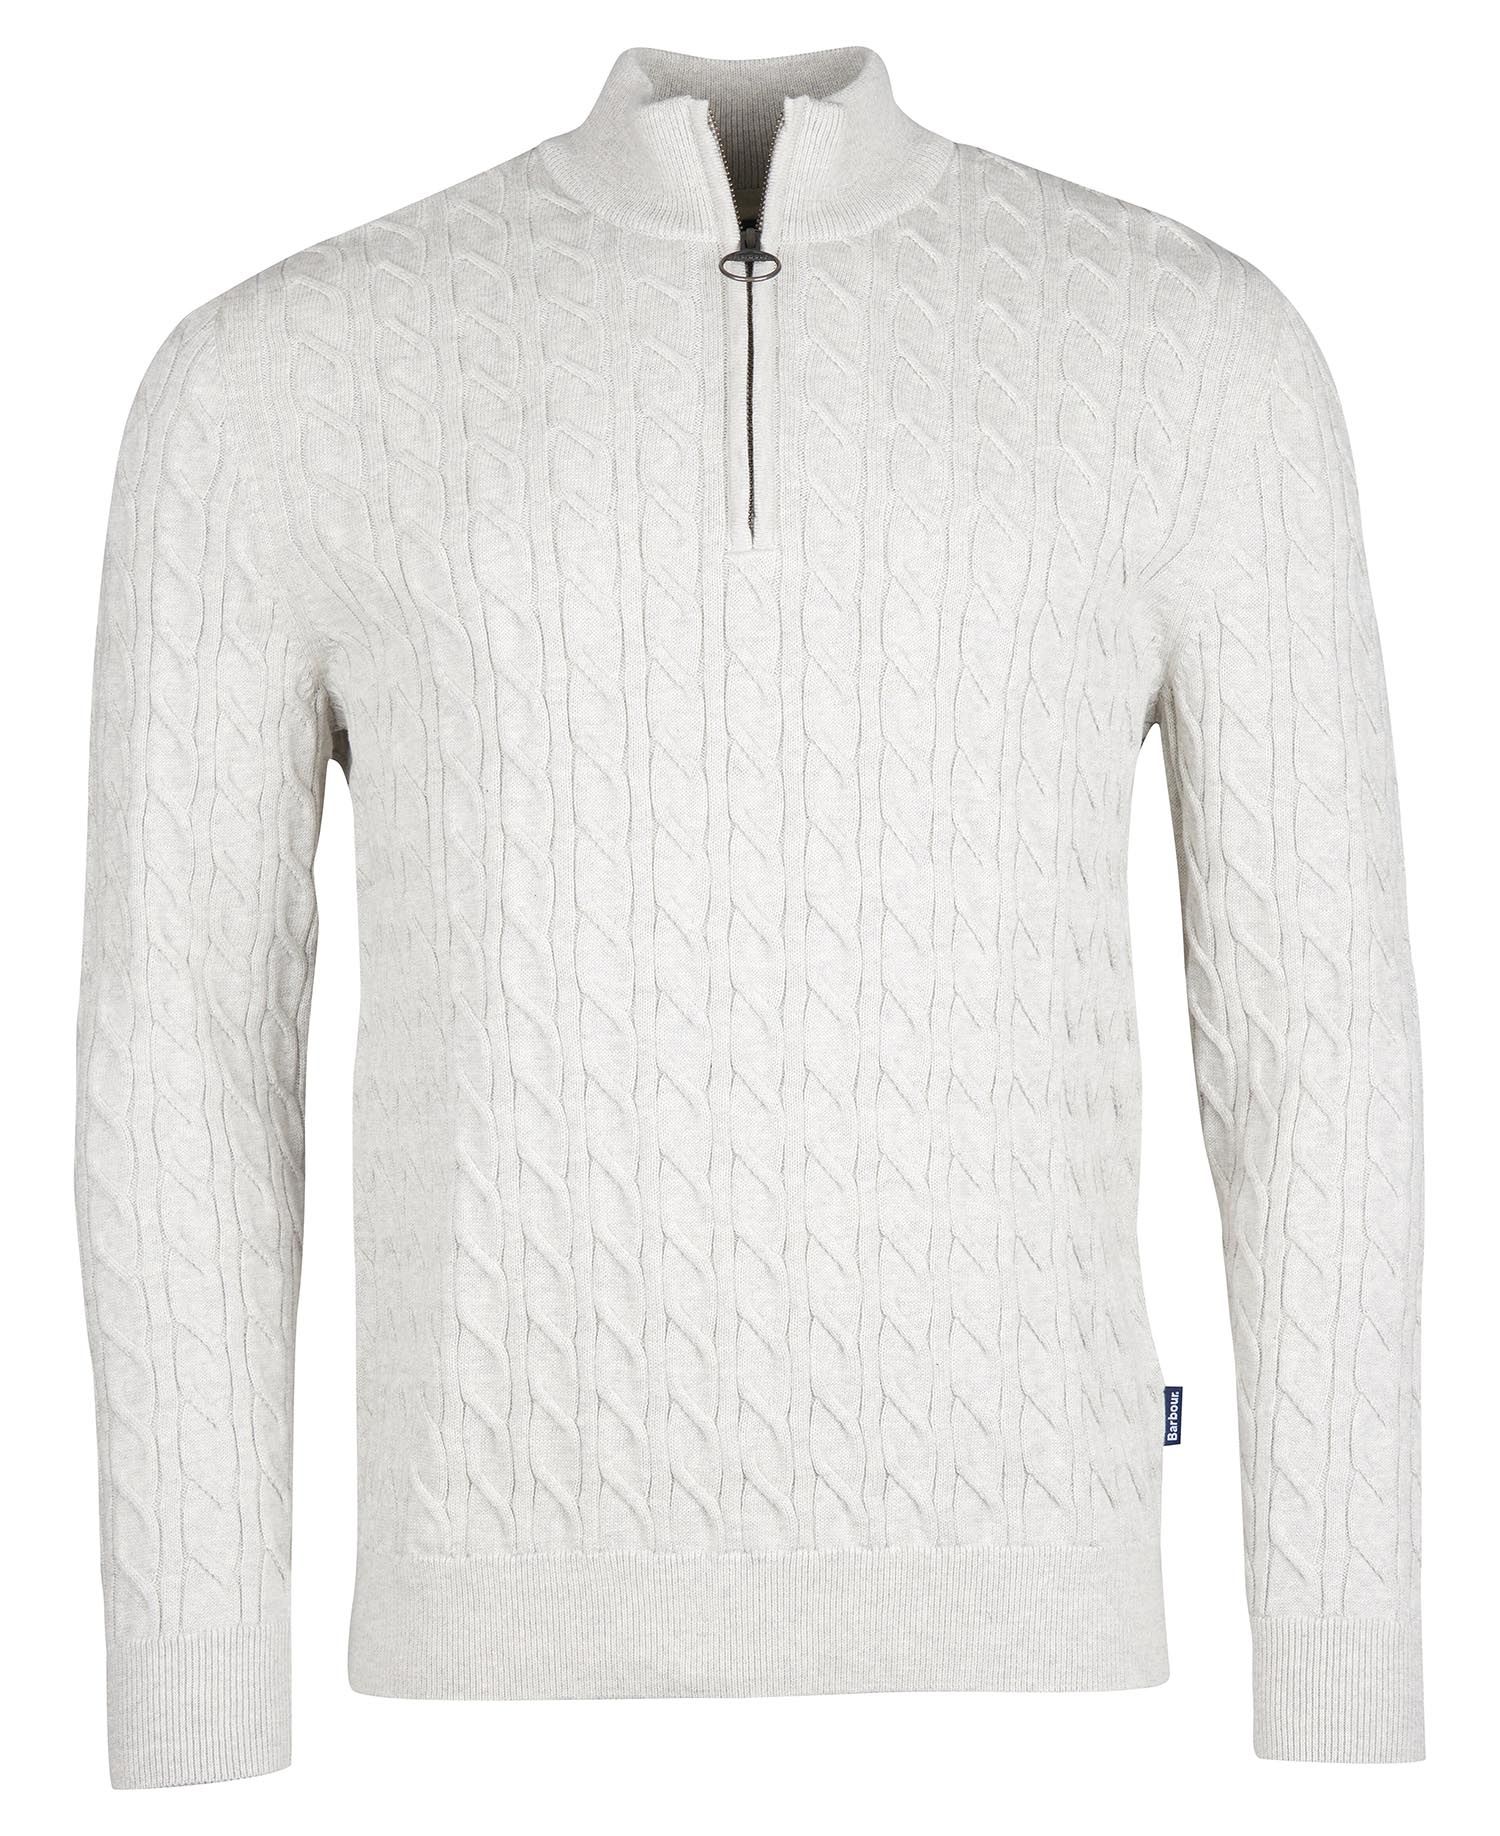 Shop the Barbour Cable Knit Half Zip in Beige | Barbour